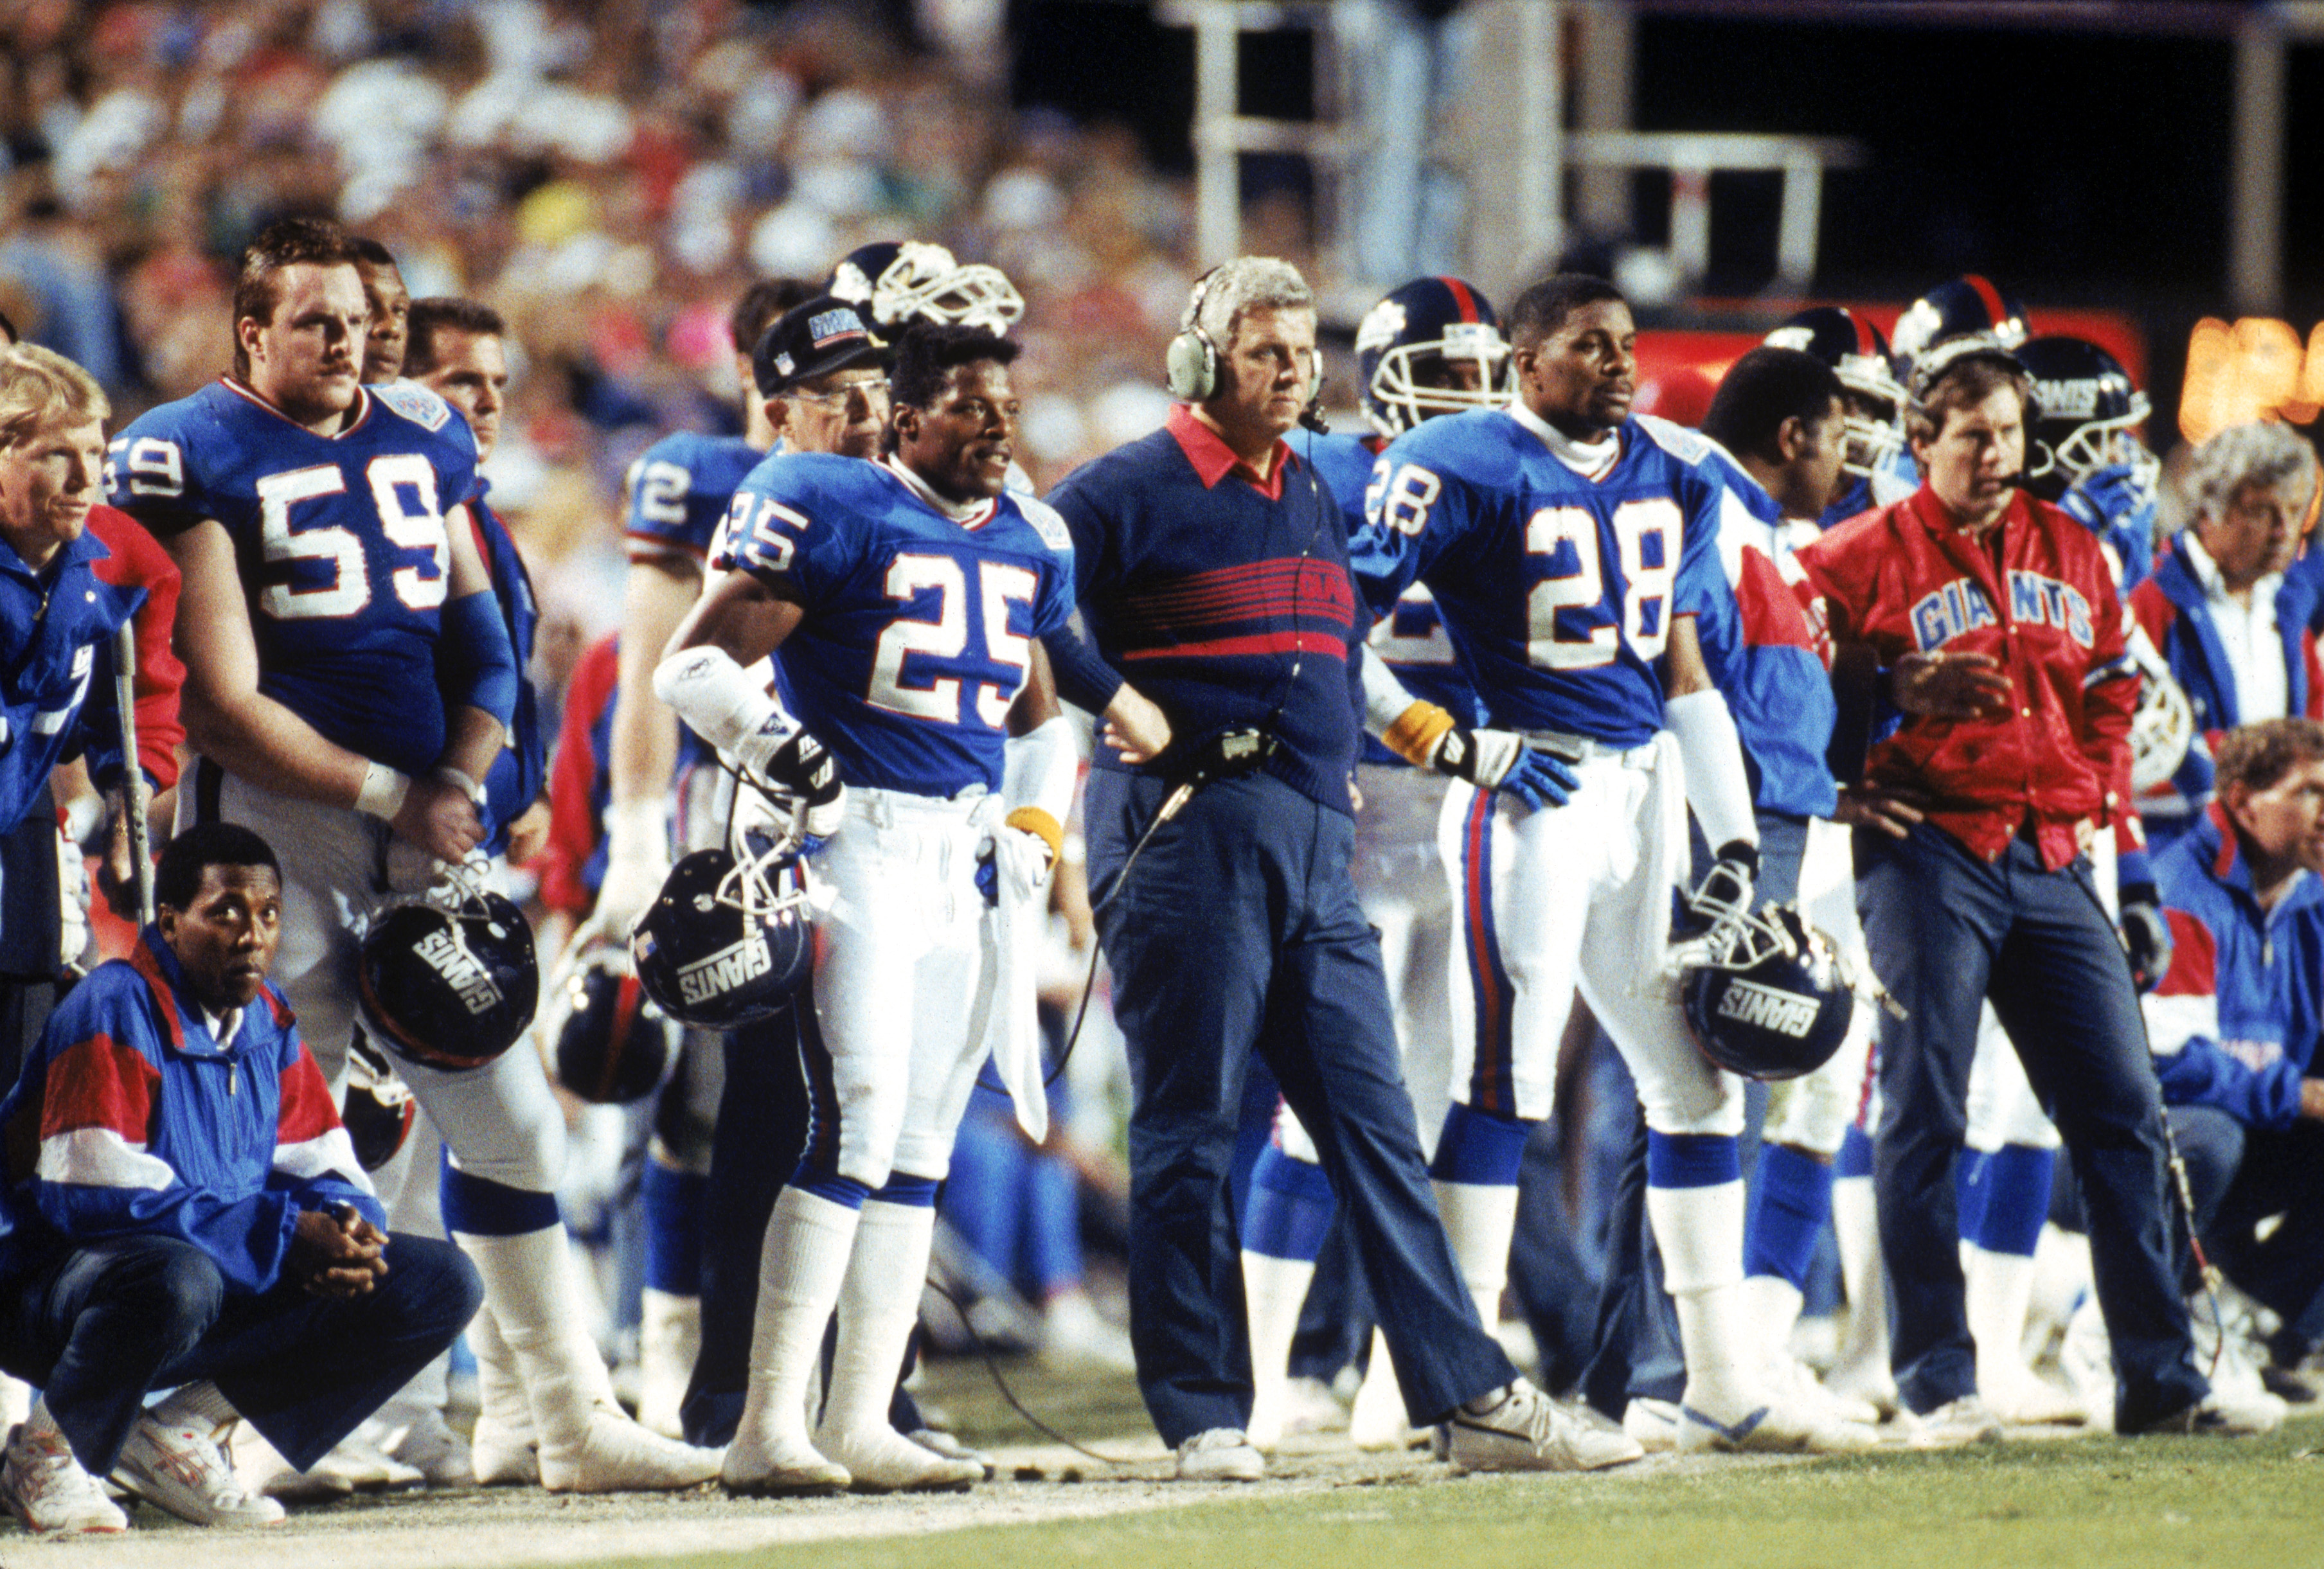 TAMPA, FL - JANUARY 27:  Cornerback Mark Collins #25, head coach Bill Parcells, cornerback Everson Walls #28 and assistant coach Bill Belichick of the New York Giants stand on the sideline against the Buffalo Bills during Super Bowl XXV at Tampa Stadium o